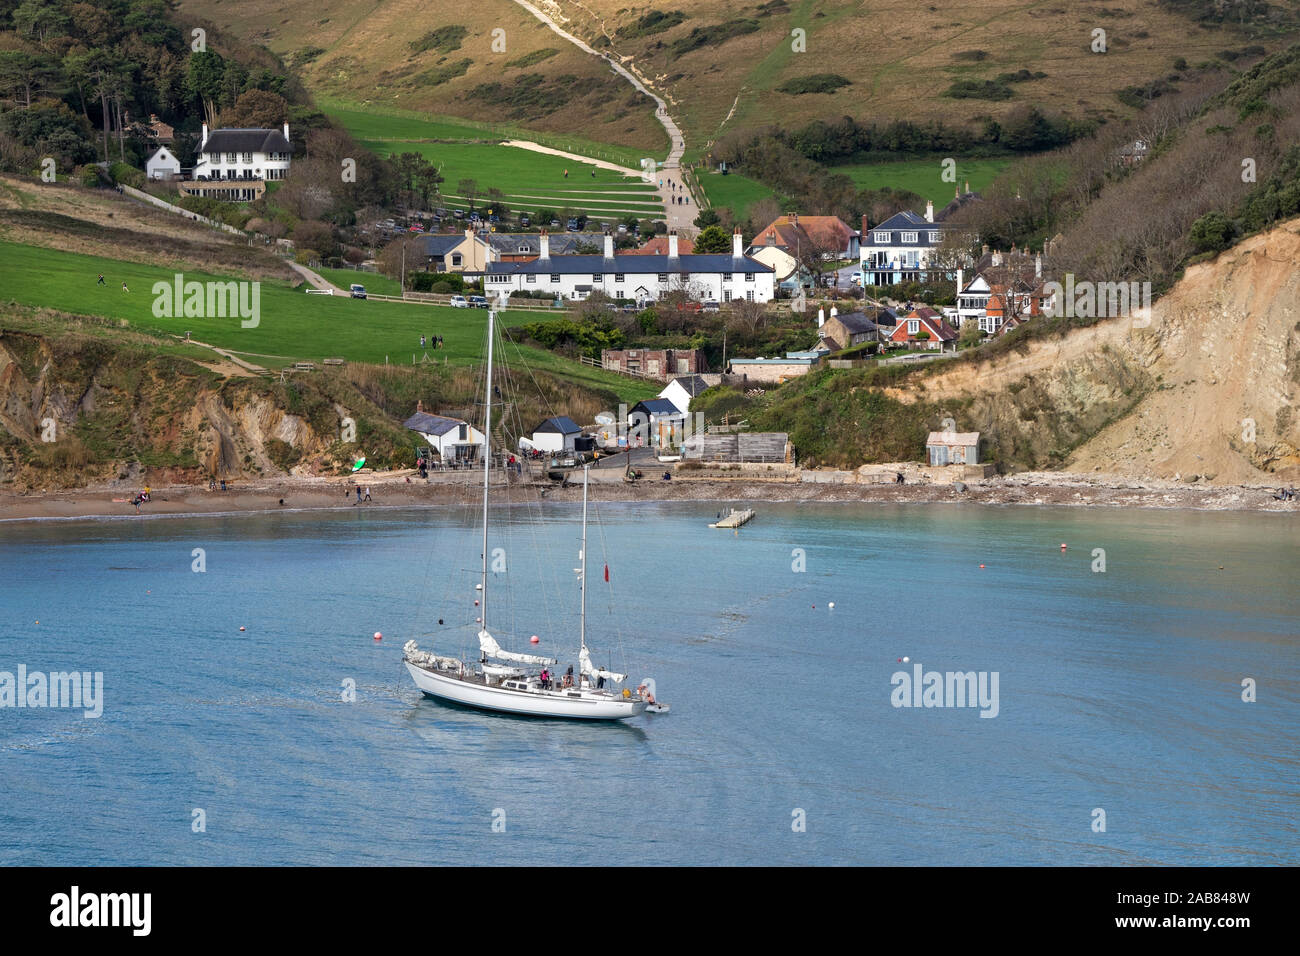 The Sailing Yacht, Donald Searle, Moored in Lulworth Cove, Dorset, UK Stock Photo